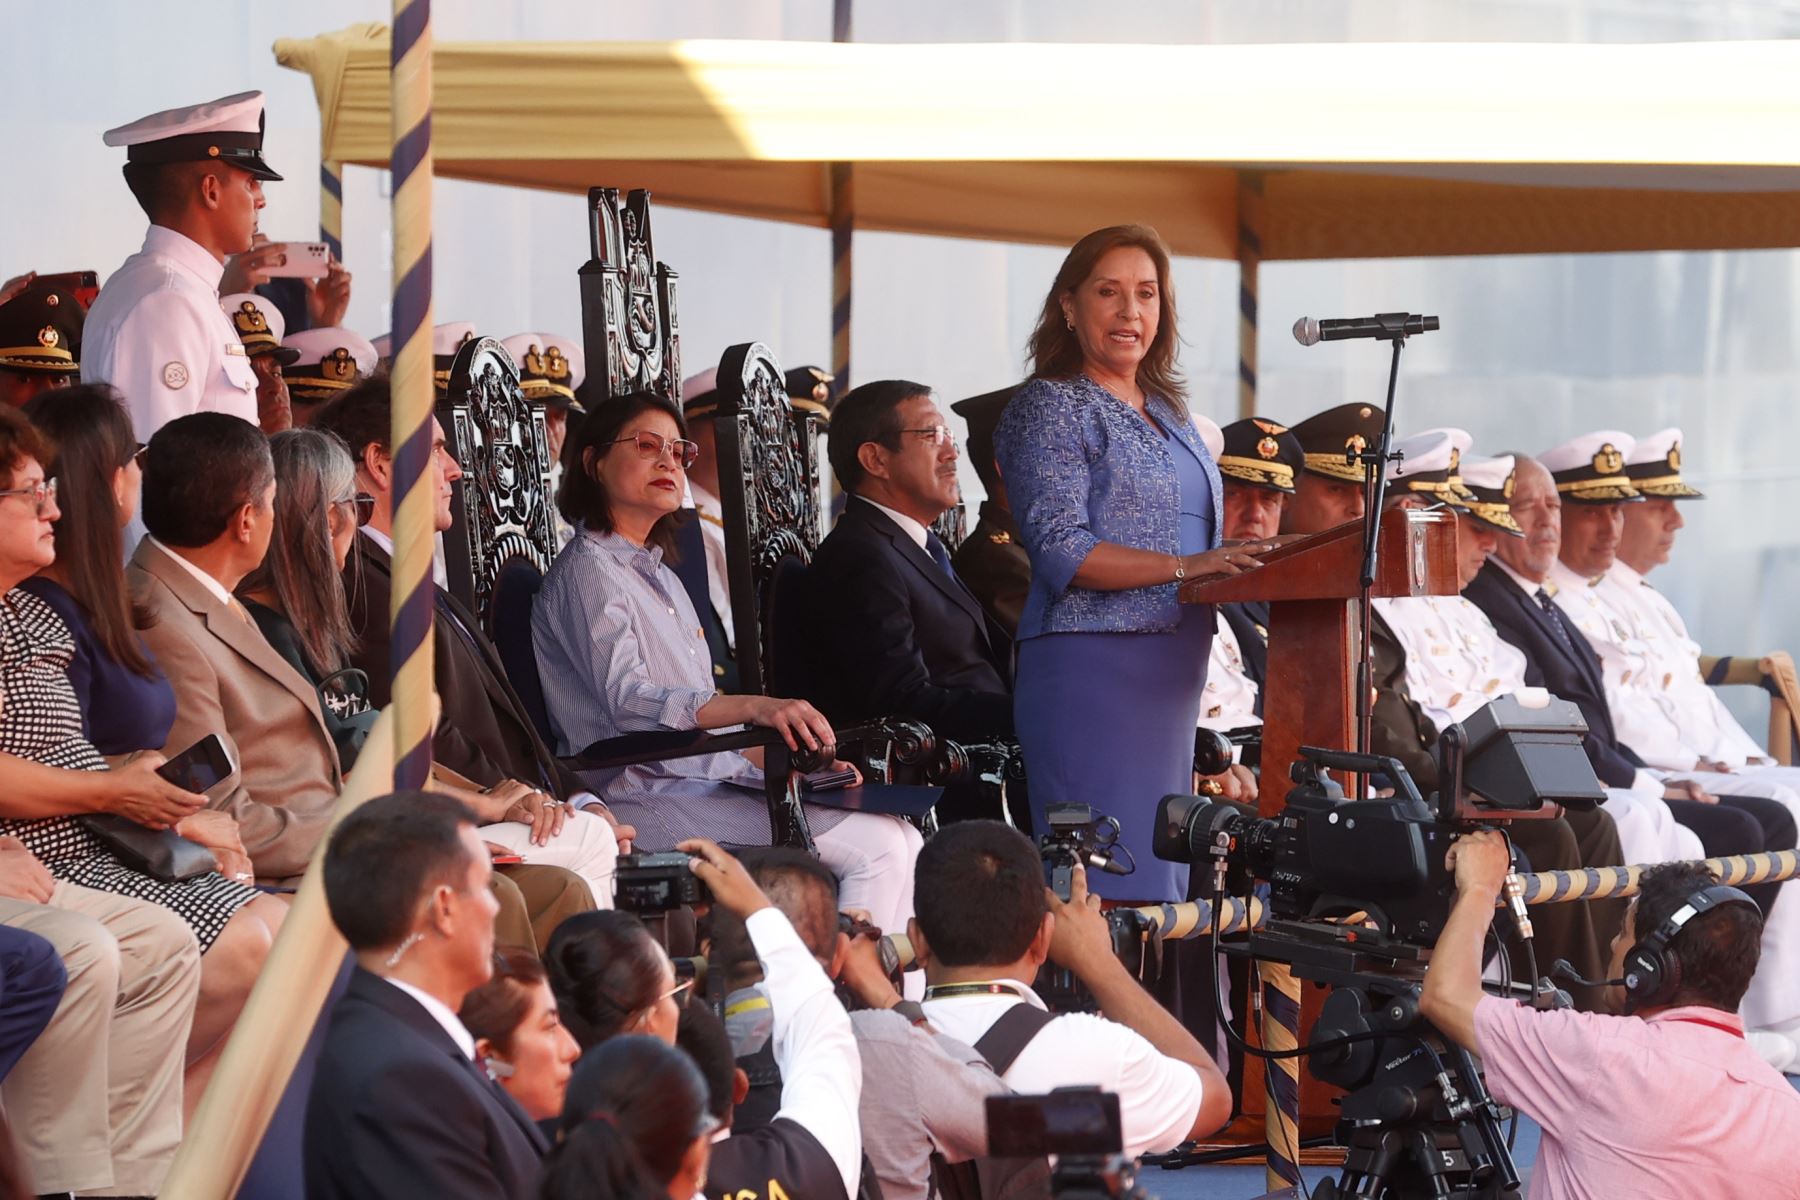 Peru’s President: Those who staged coup won’t destabilize a legitimate government